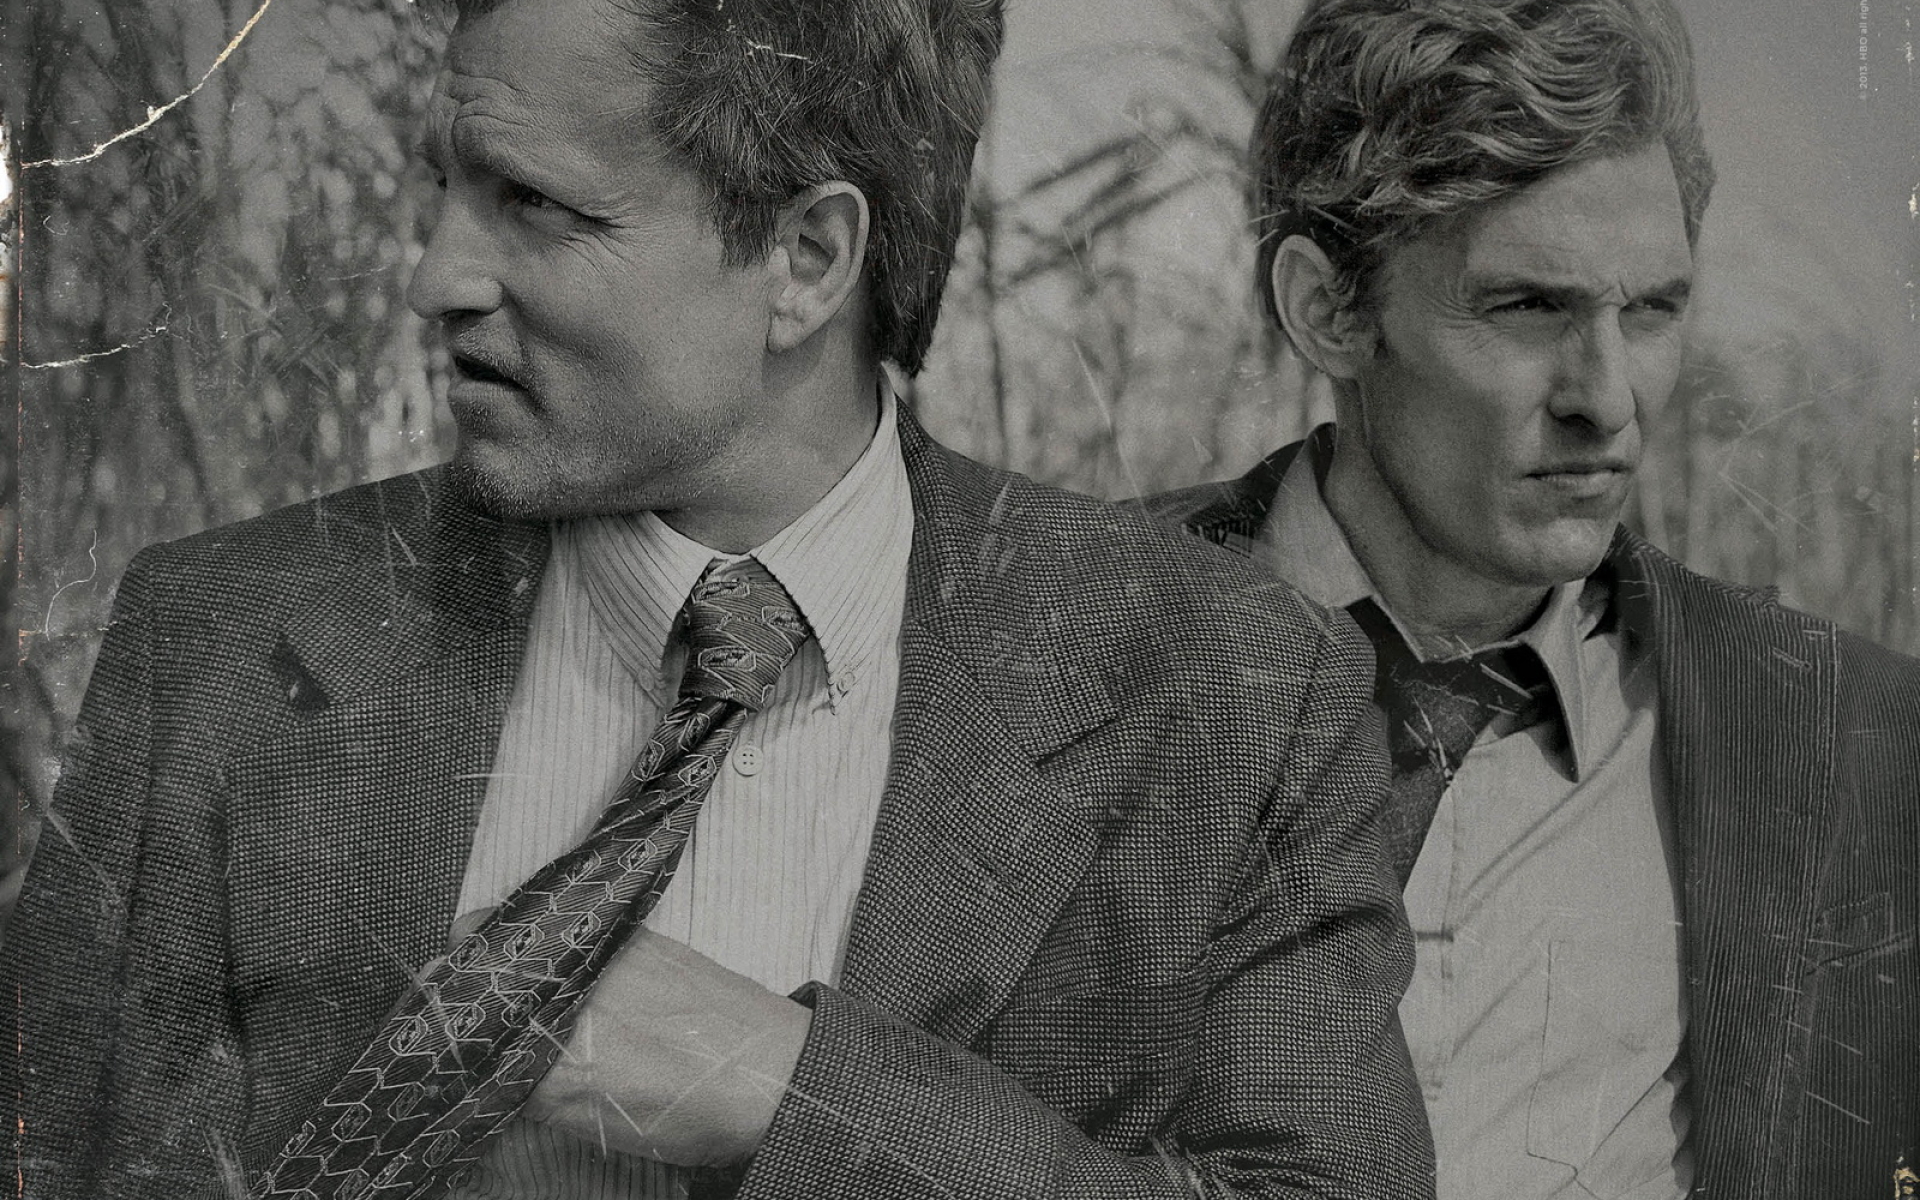 Rust cohle and marty фото 10